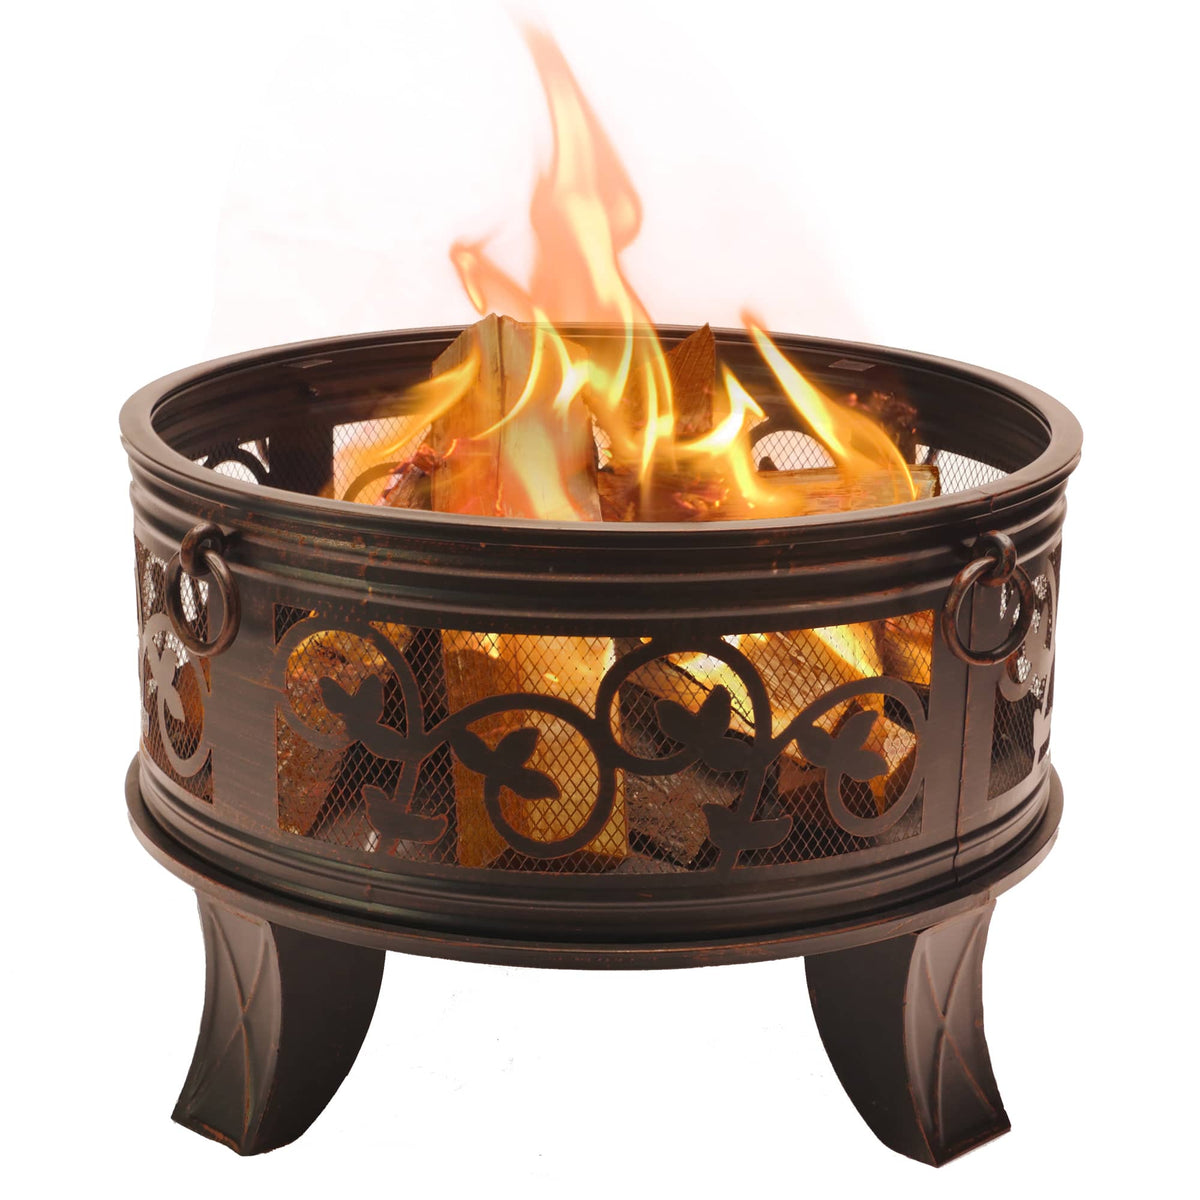 Bluegrass Living 26 Inch Cast Iron Deep Bowl Fire Pit with Cooking Gri